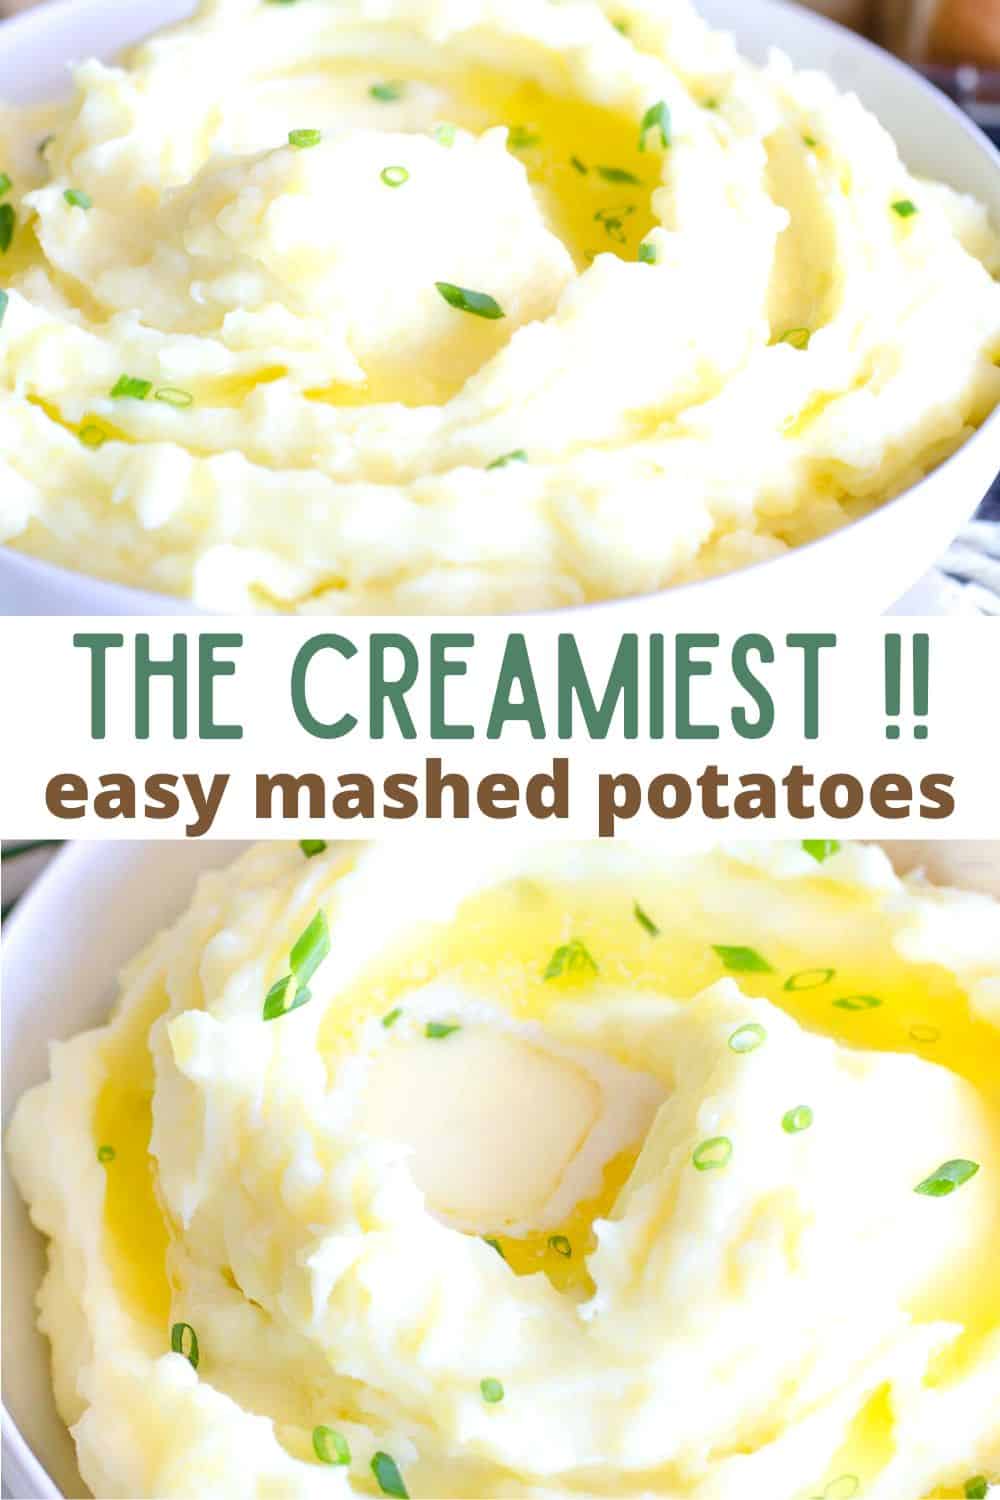 These creamy mashed potatoes are mashed with heavy cream, sour cream and butter for the best homemade mashed potatoes recipe. Perfect for Thanksgiving, Christmas and other family meals!